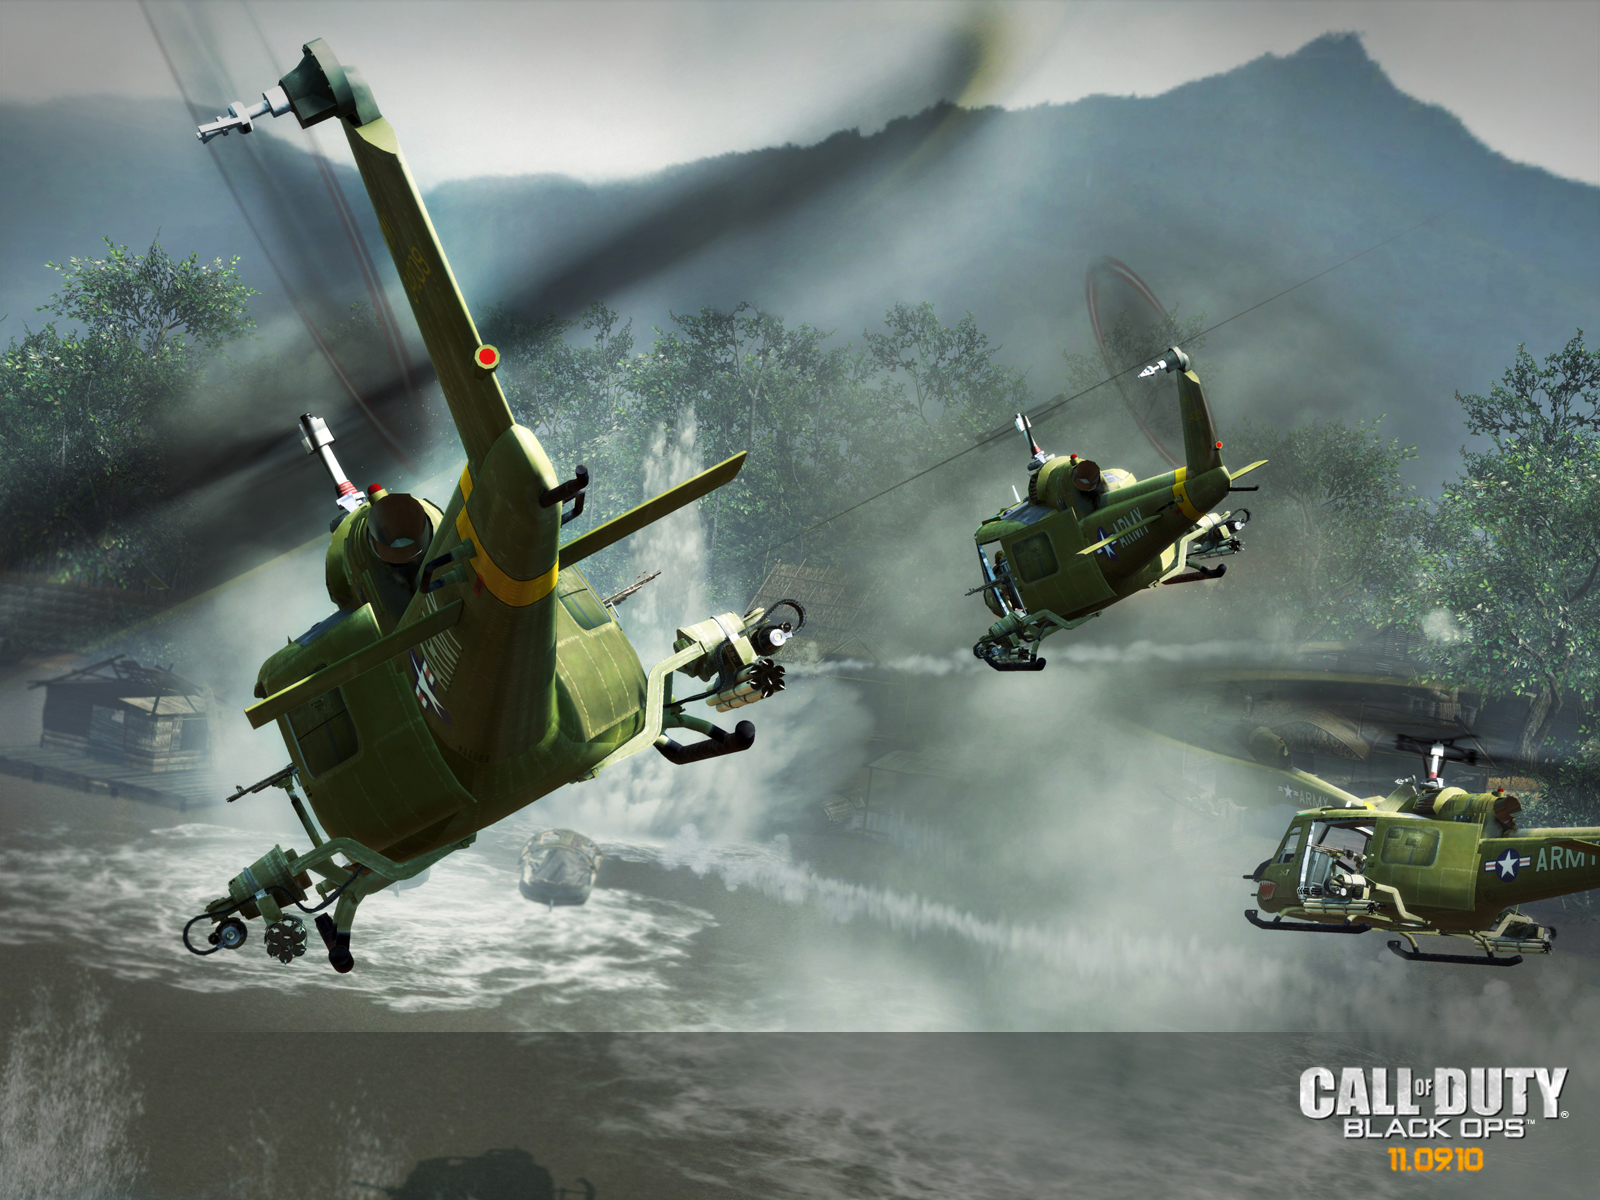 Call of duty black ops Wallpapers and Backgrounds